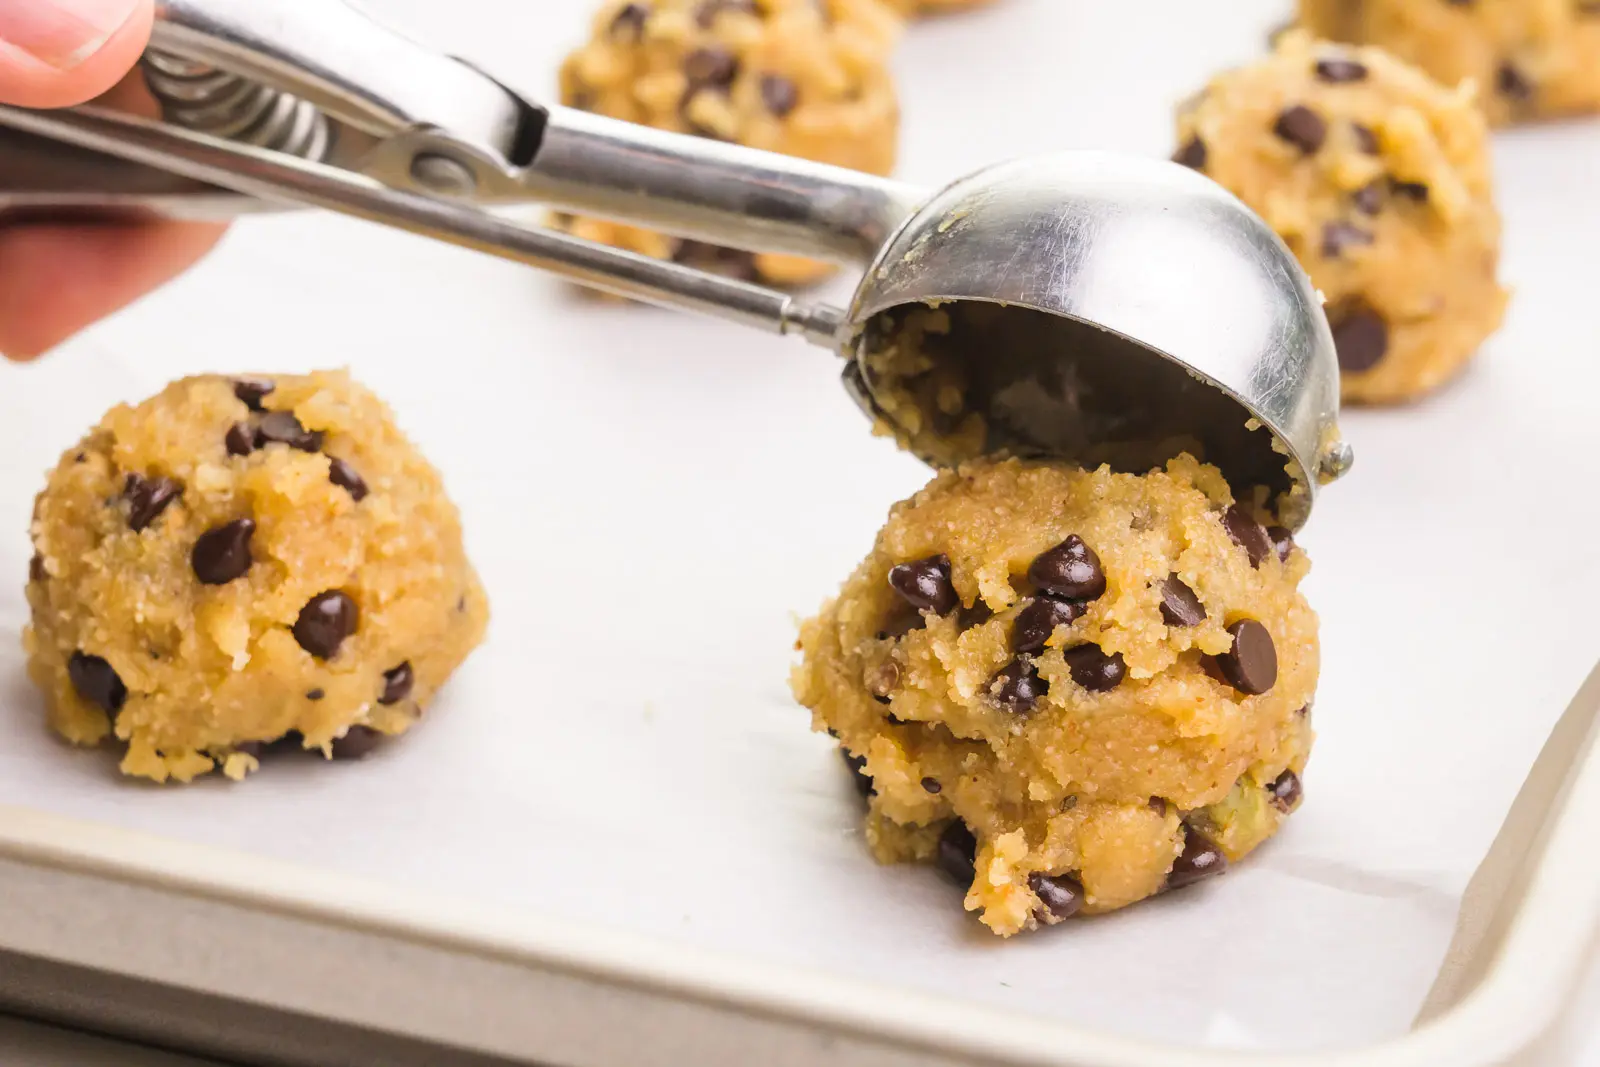 A hand holds a cookie scoop, scooping mounds of cookie dough batter on a cookie sheet lined with parchment paper.